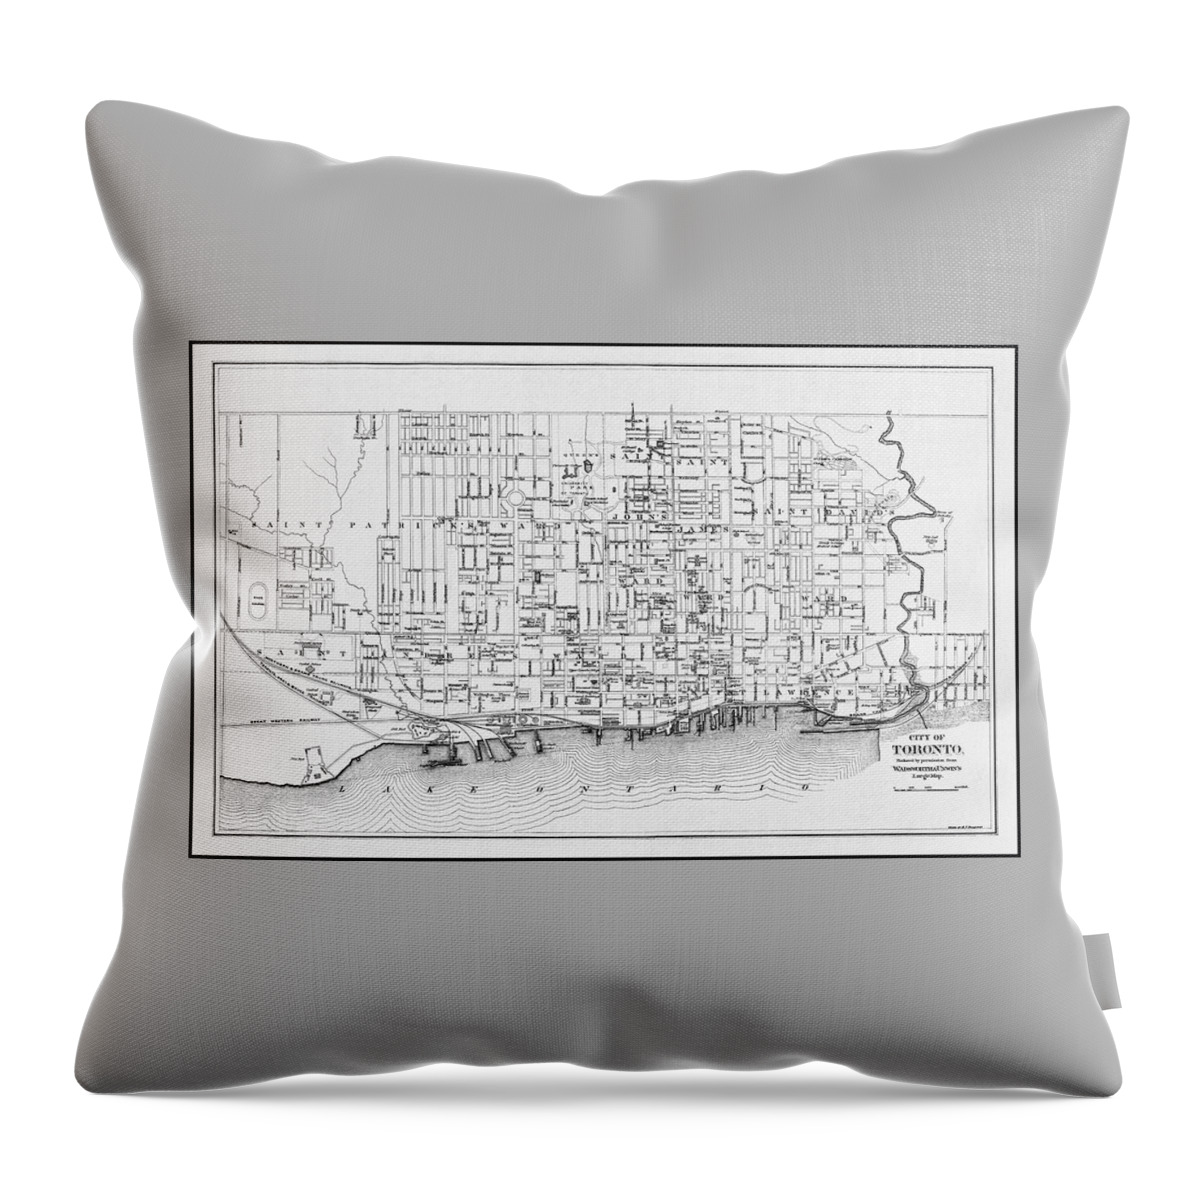 Toronto Throw Pillow featuring the photograph Toronto Canada Vintage City Map 1880 Black and White by Carol Japp